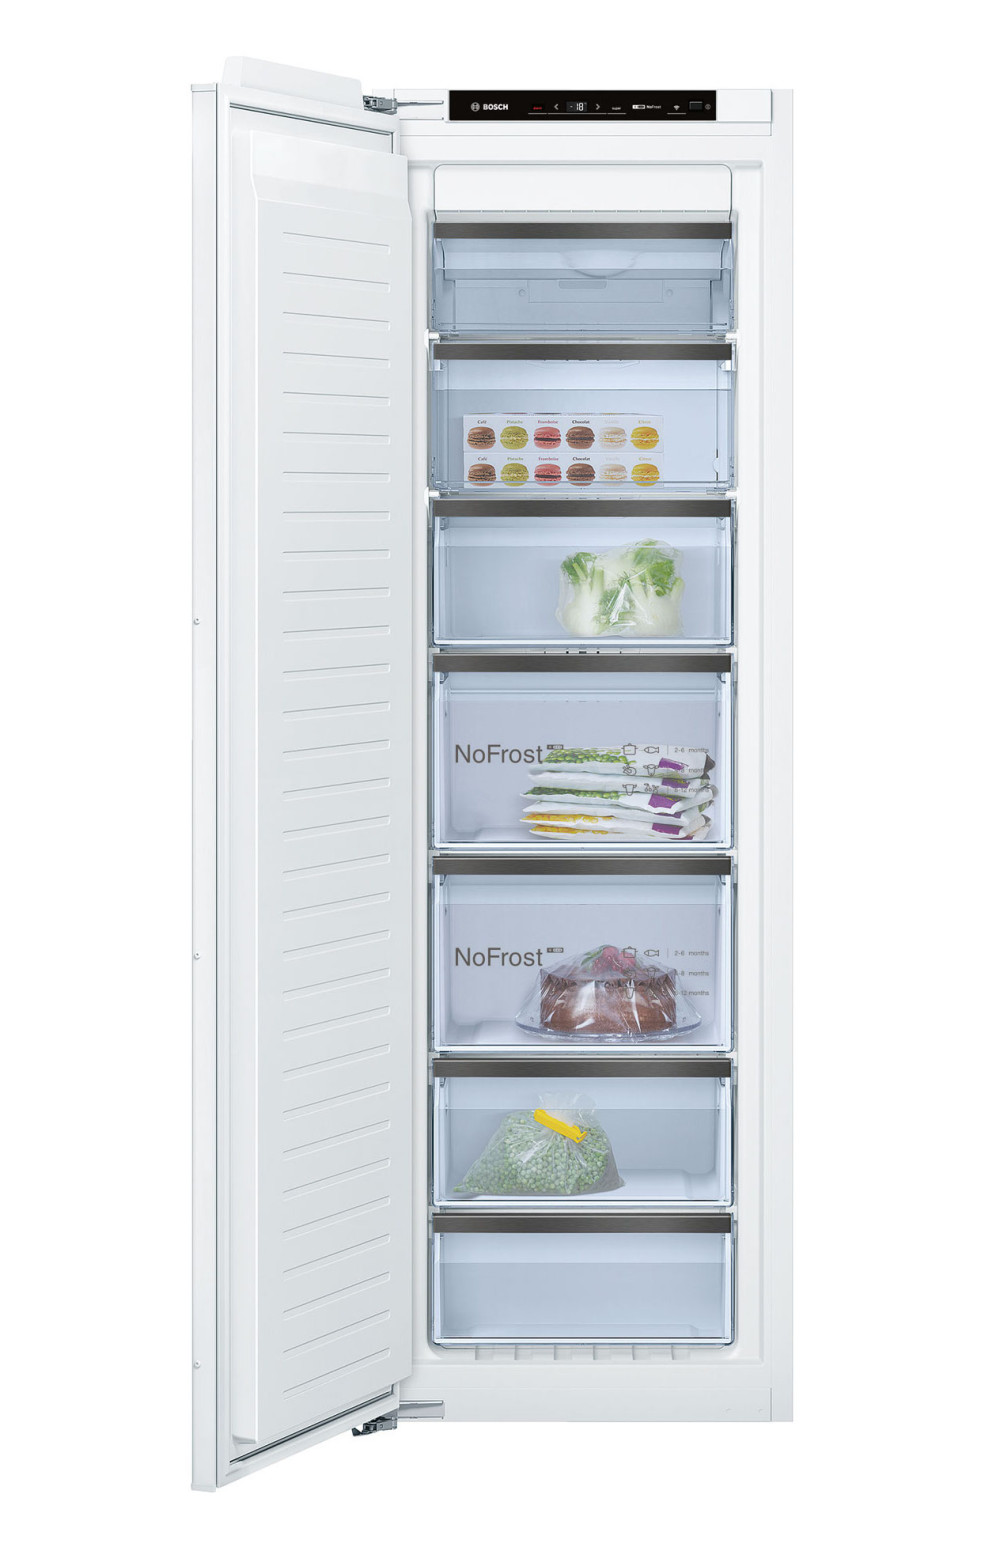 Bosch GIN81HCE0G Series 8 Built-in Freezer featured image